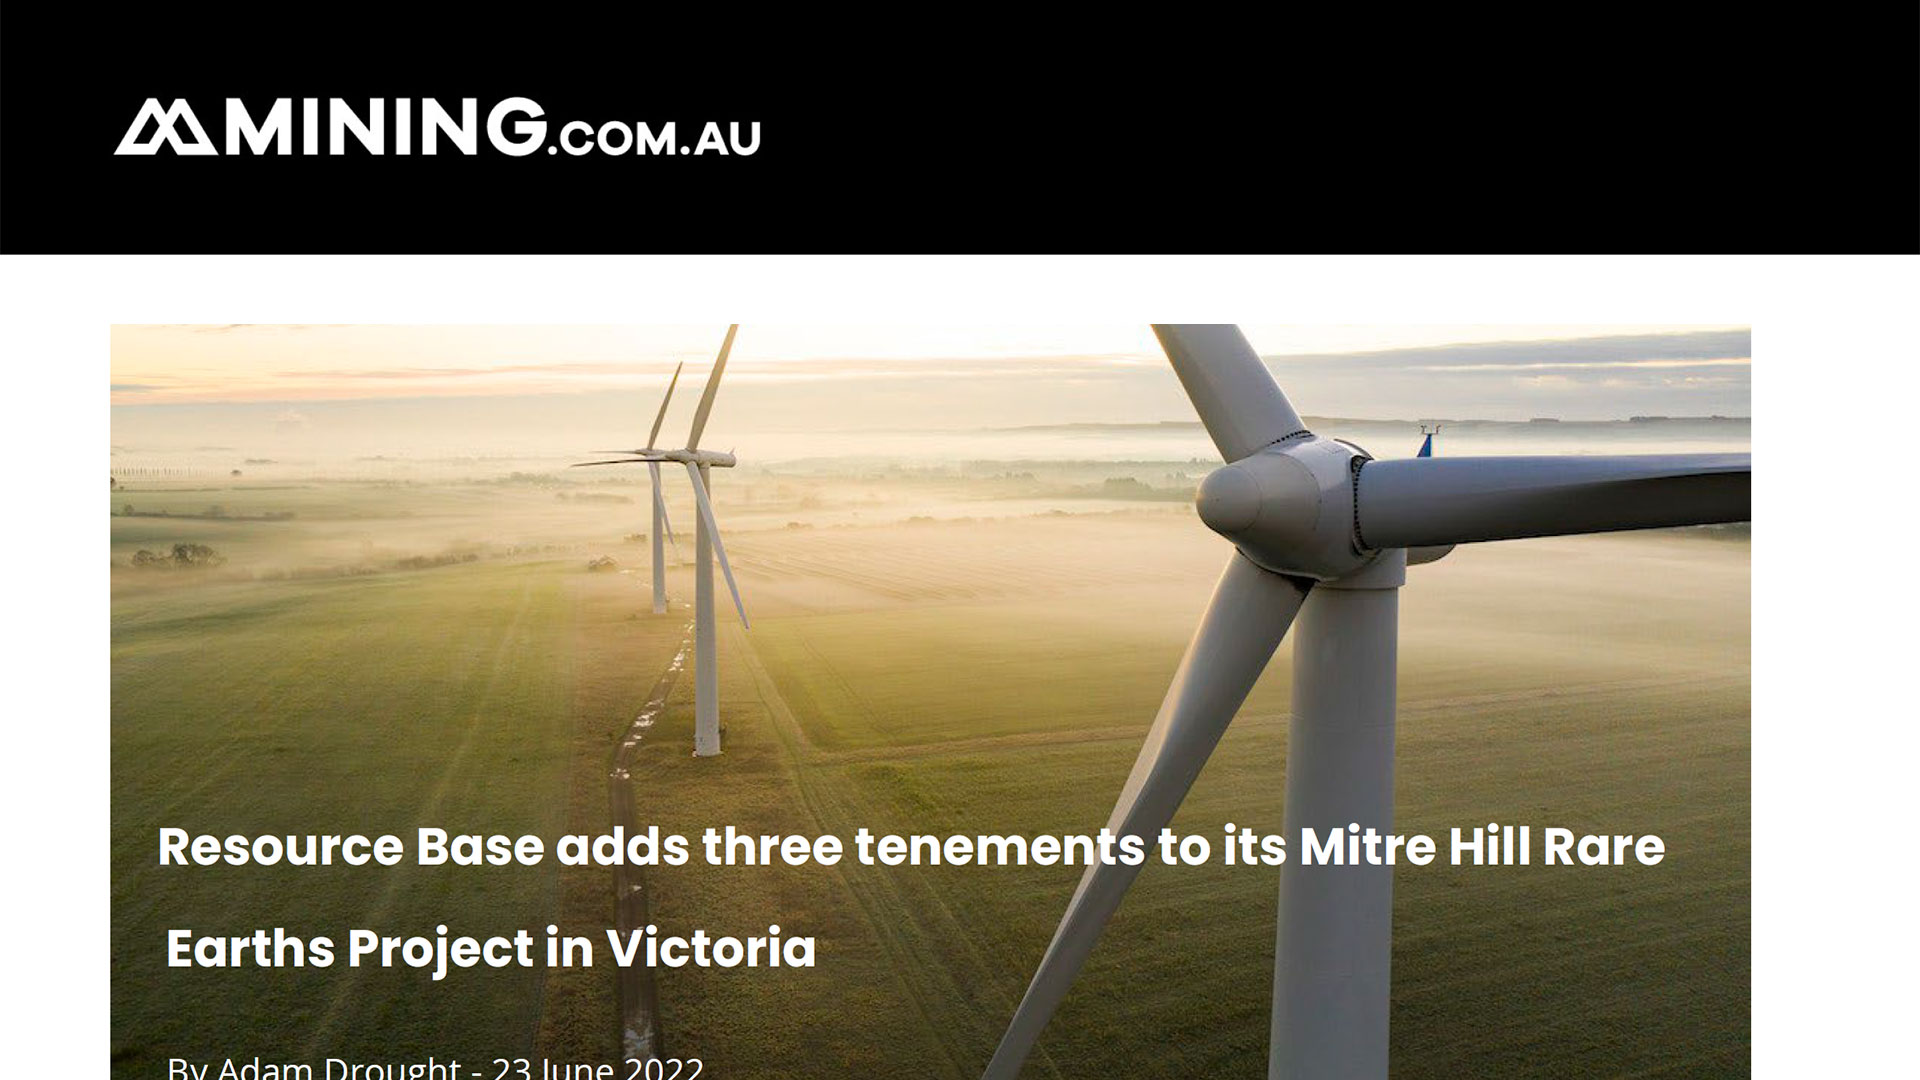 mining.com.au: Resource Base Adds Three Tenements to its Mitre Hill Rare Earths Project in Victoria